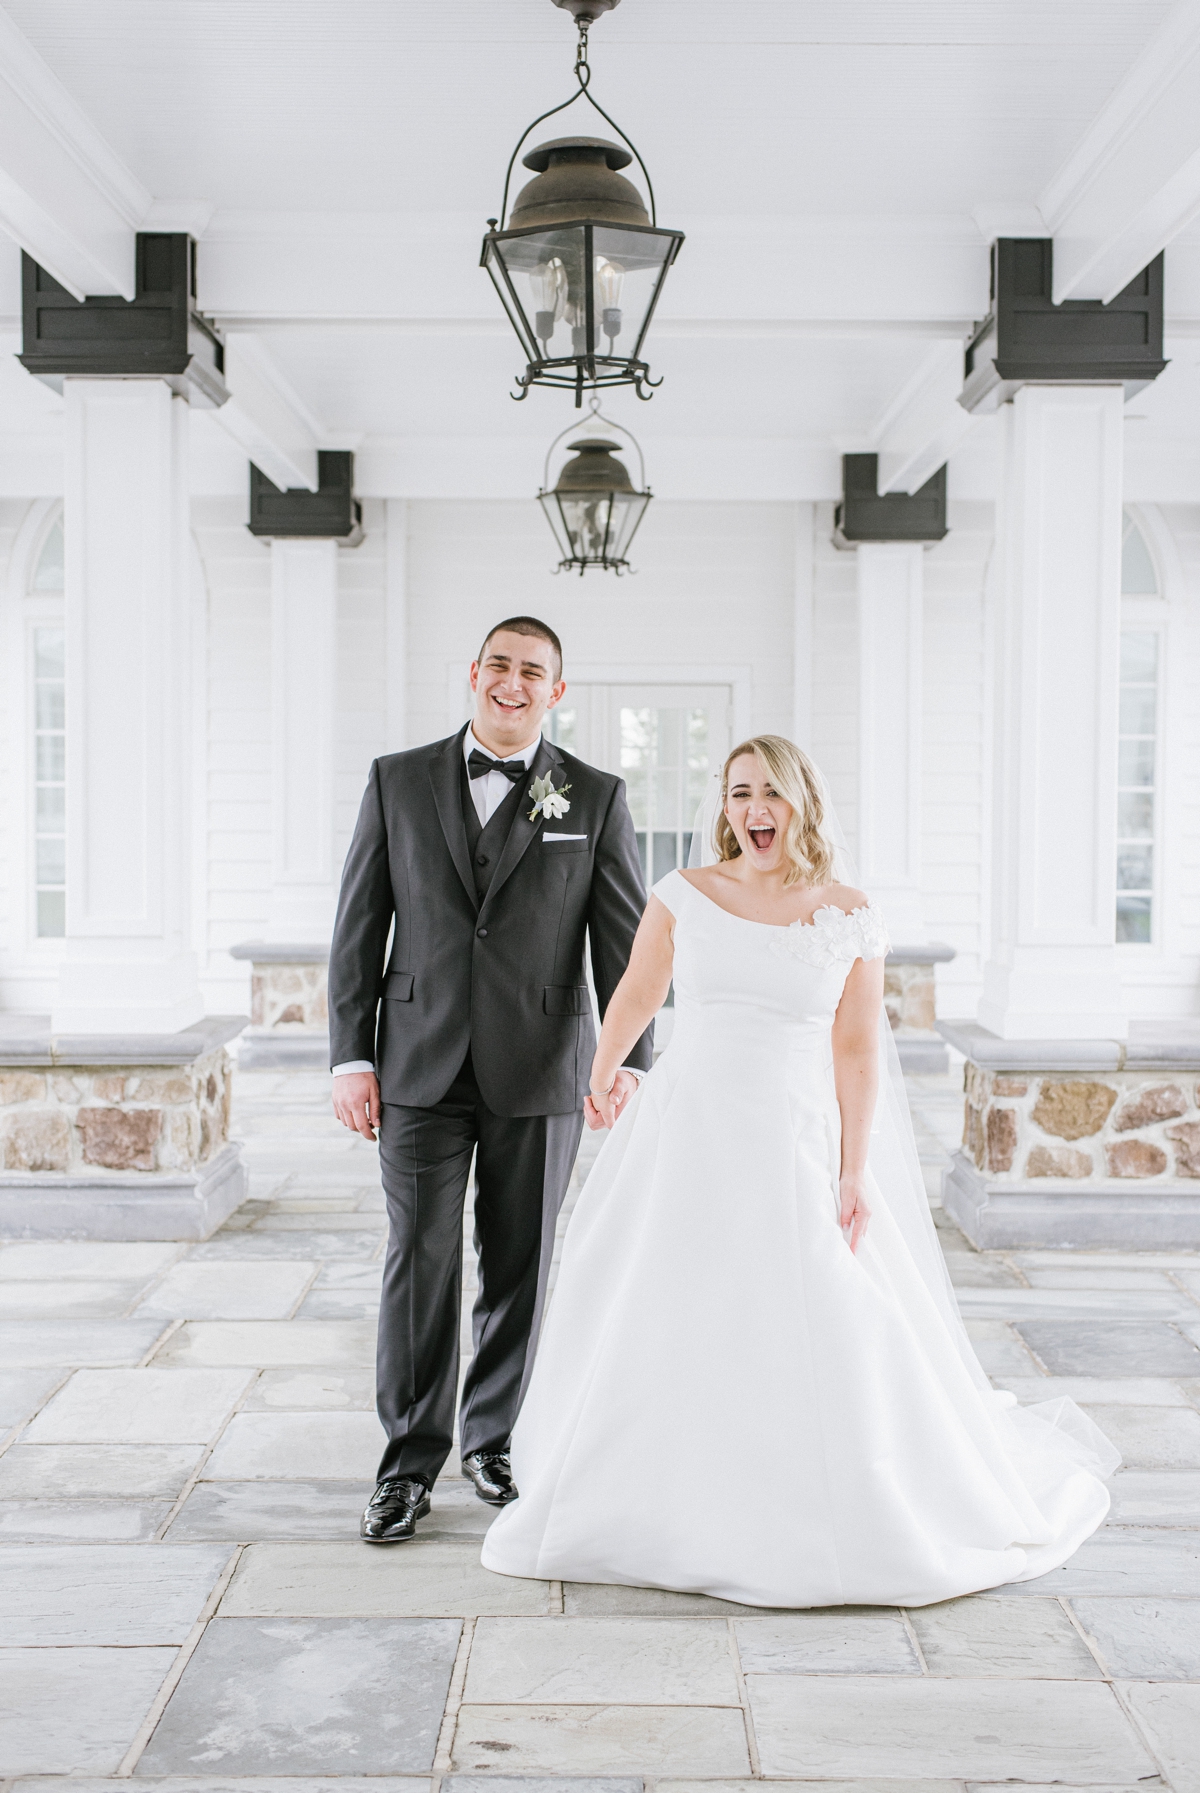 Candid wedding photography at The Ryland inn in New Jersey 